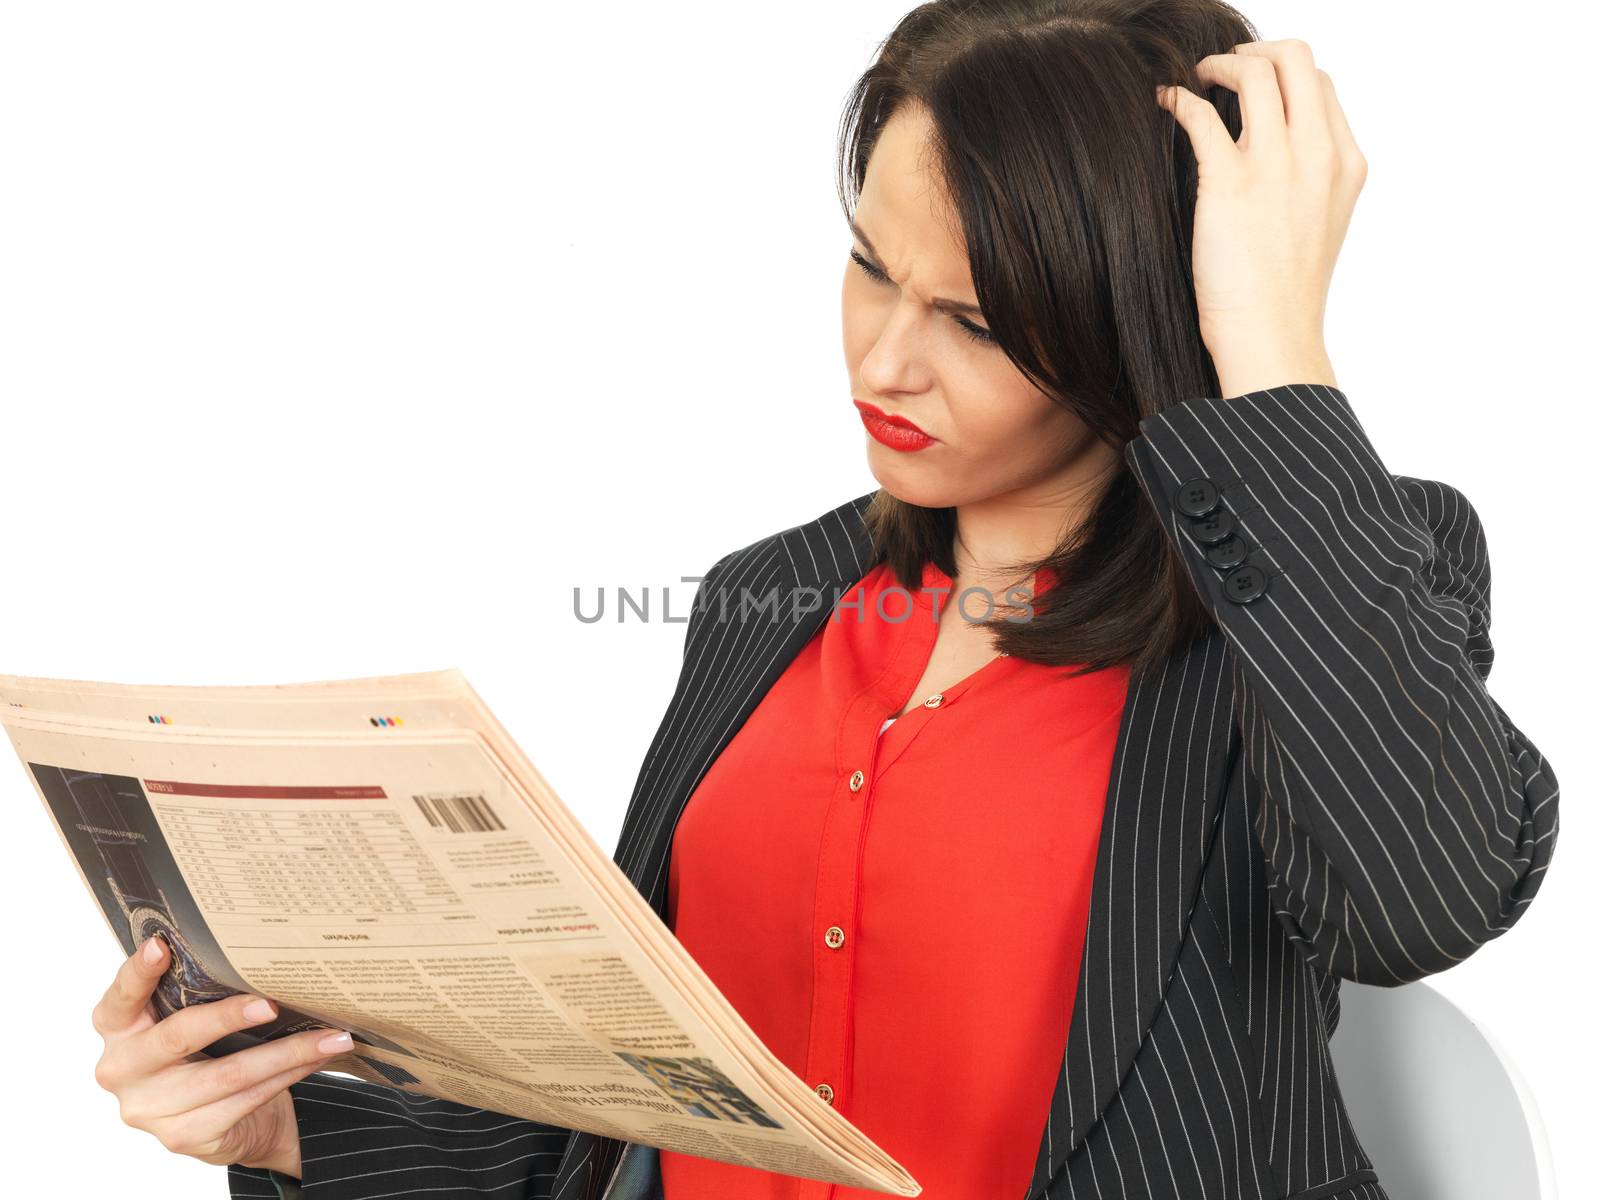 Young Business Woman Reading a Newspaper by Whiteboxmedia